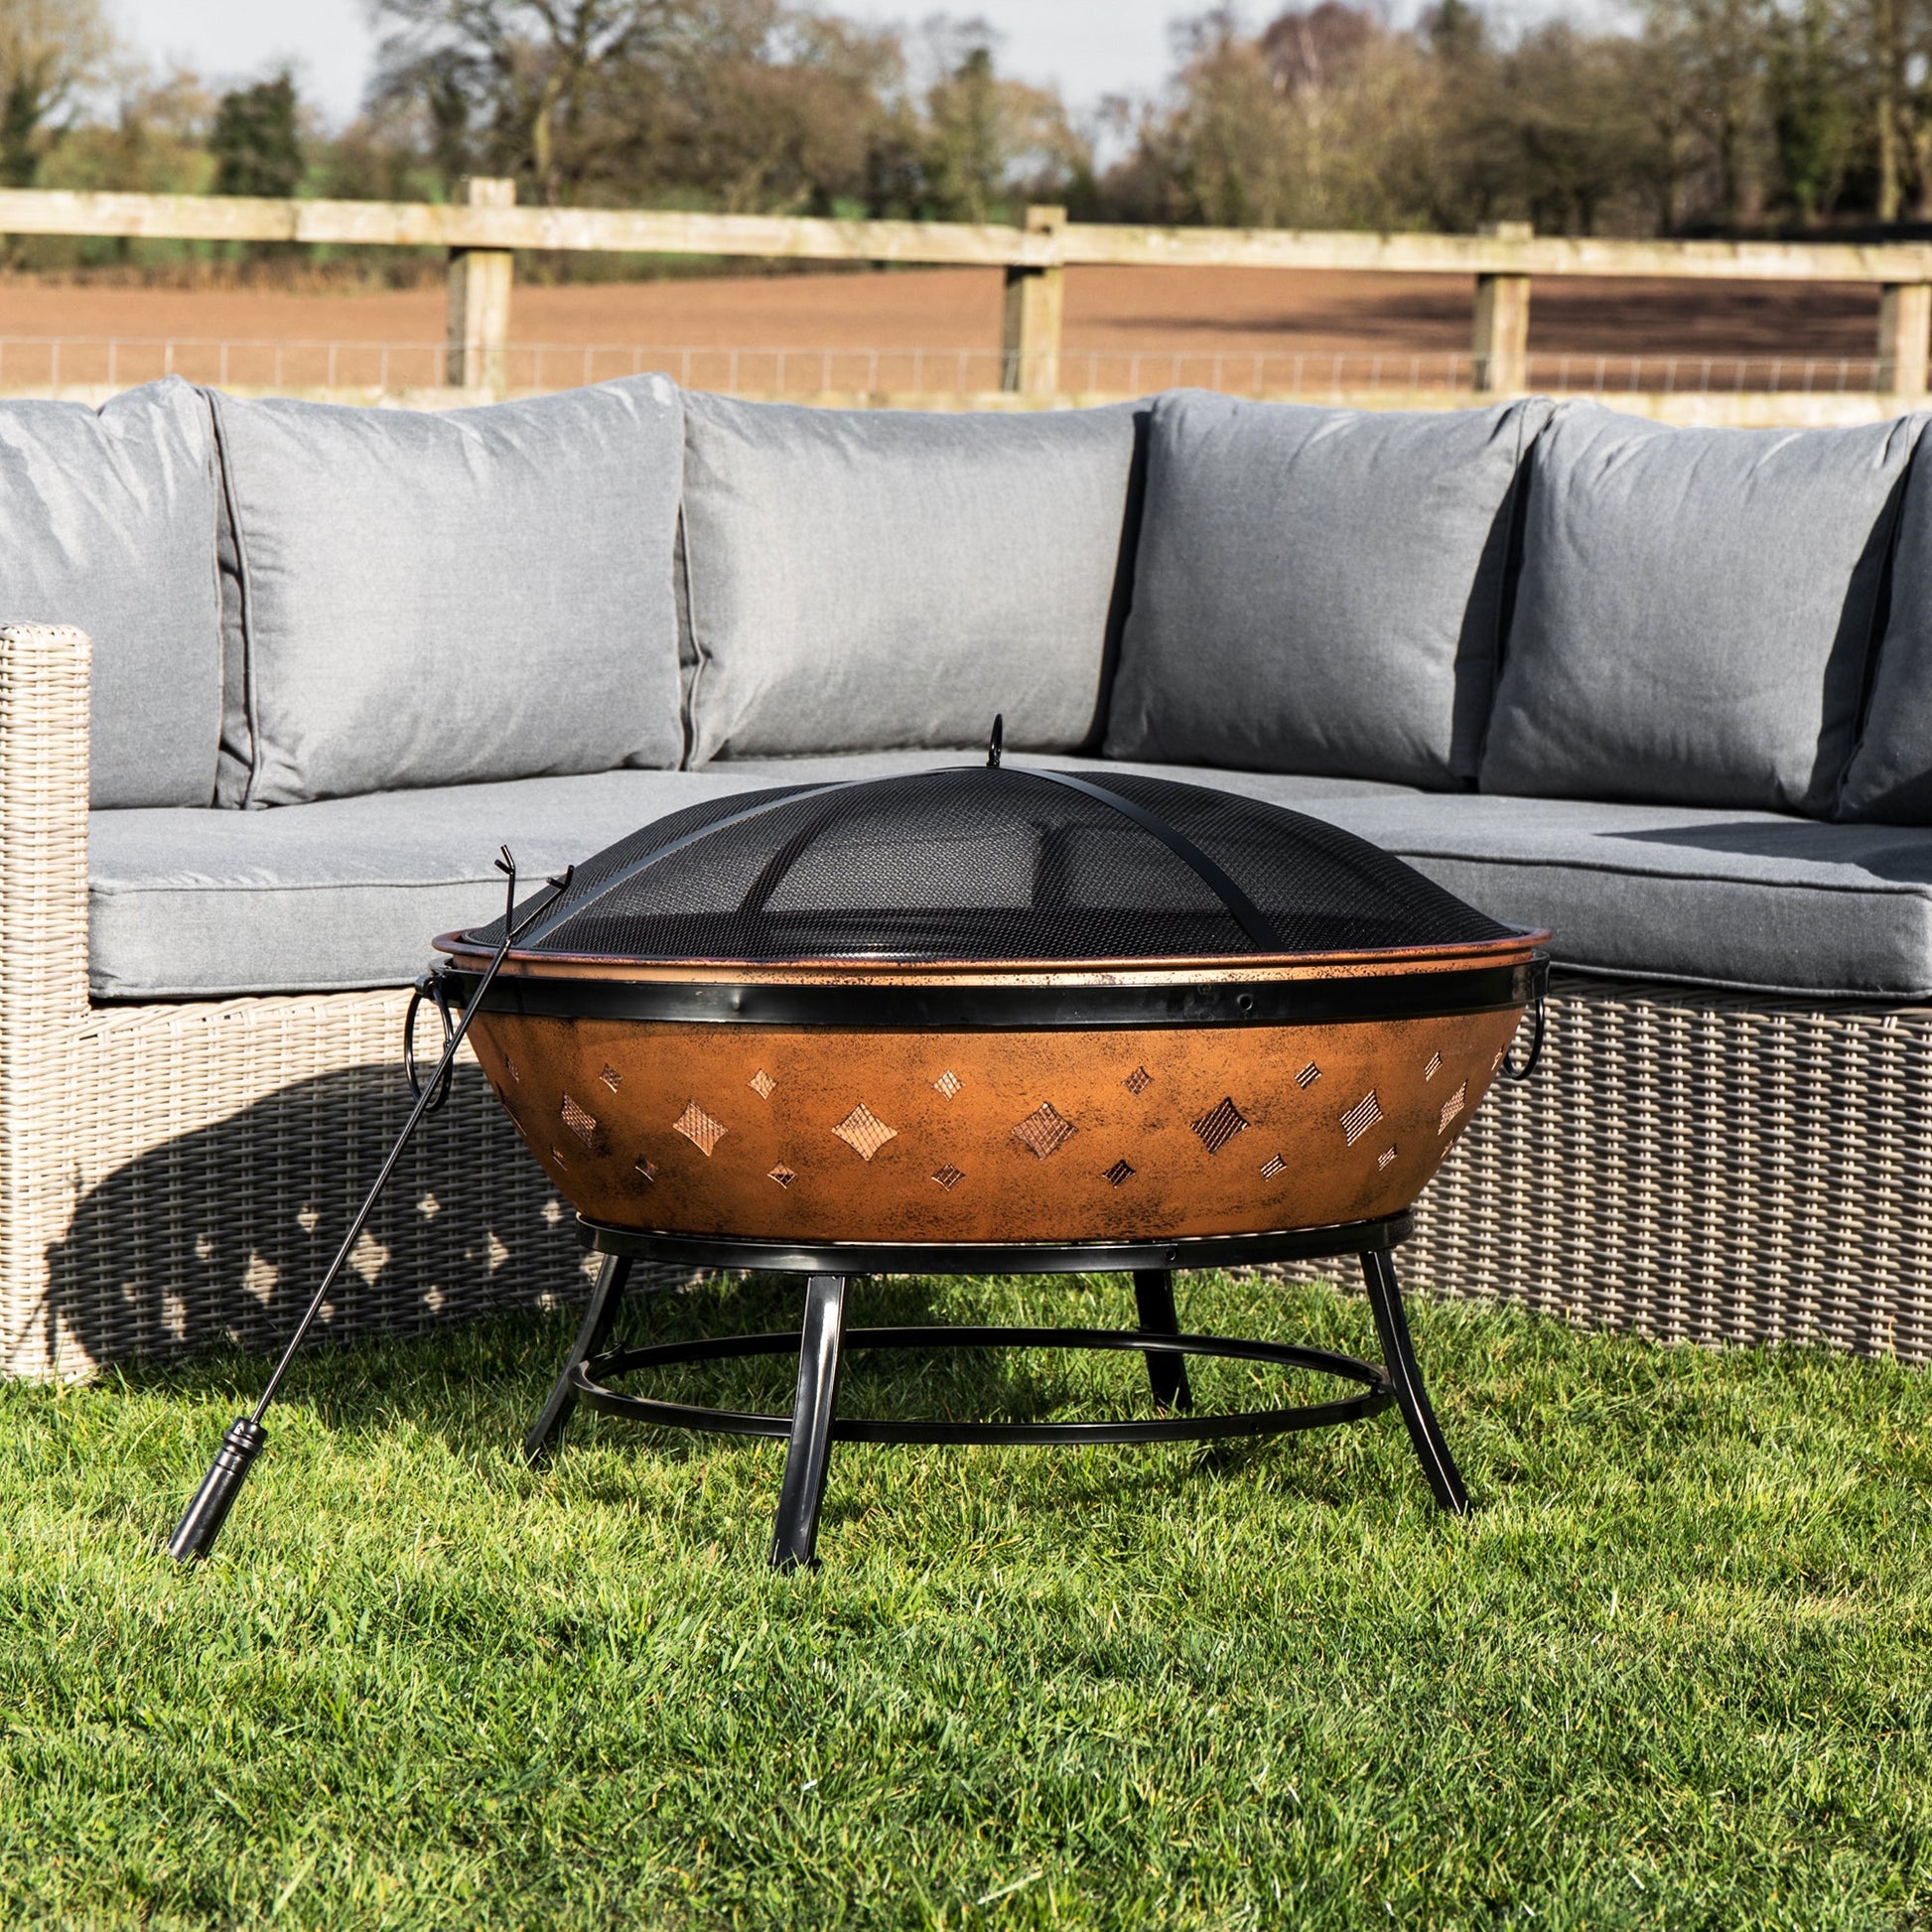 Teamson Home Wood Burning Fire Pit & Accessories - KXX  TI.CO